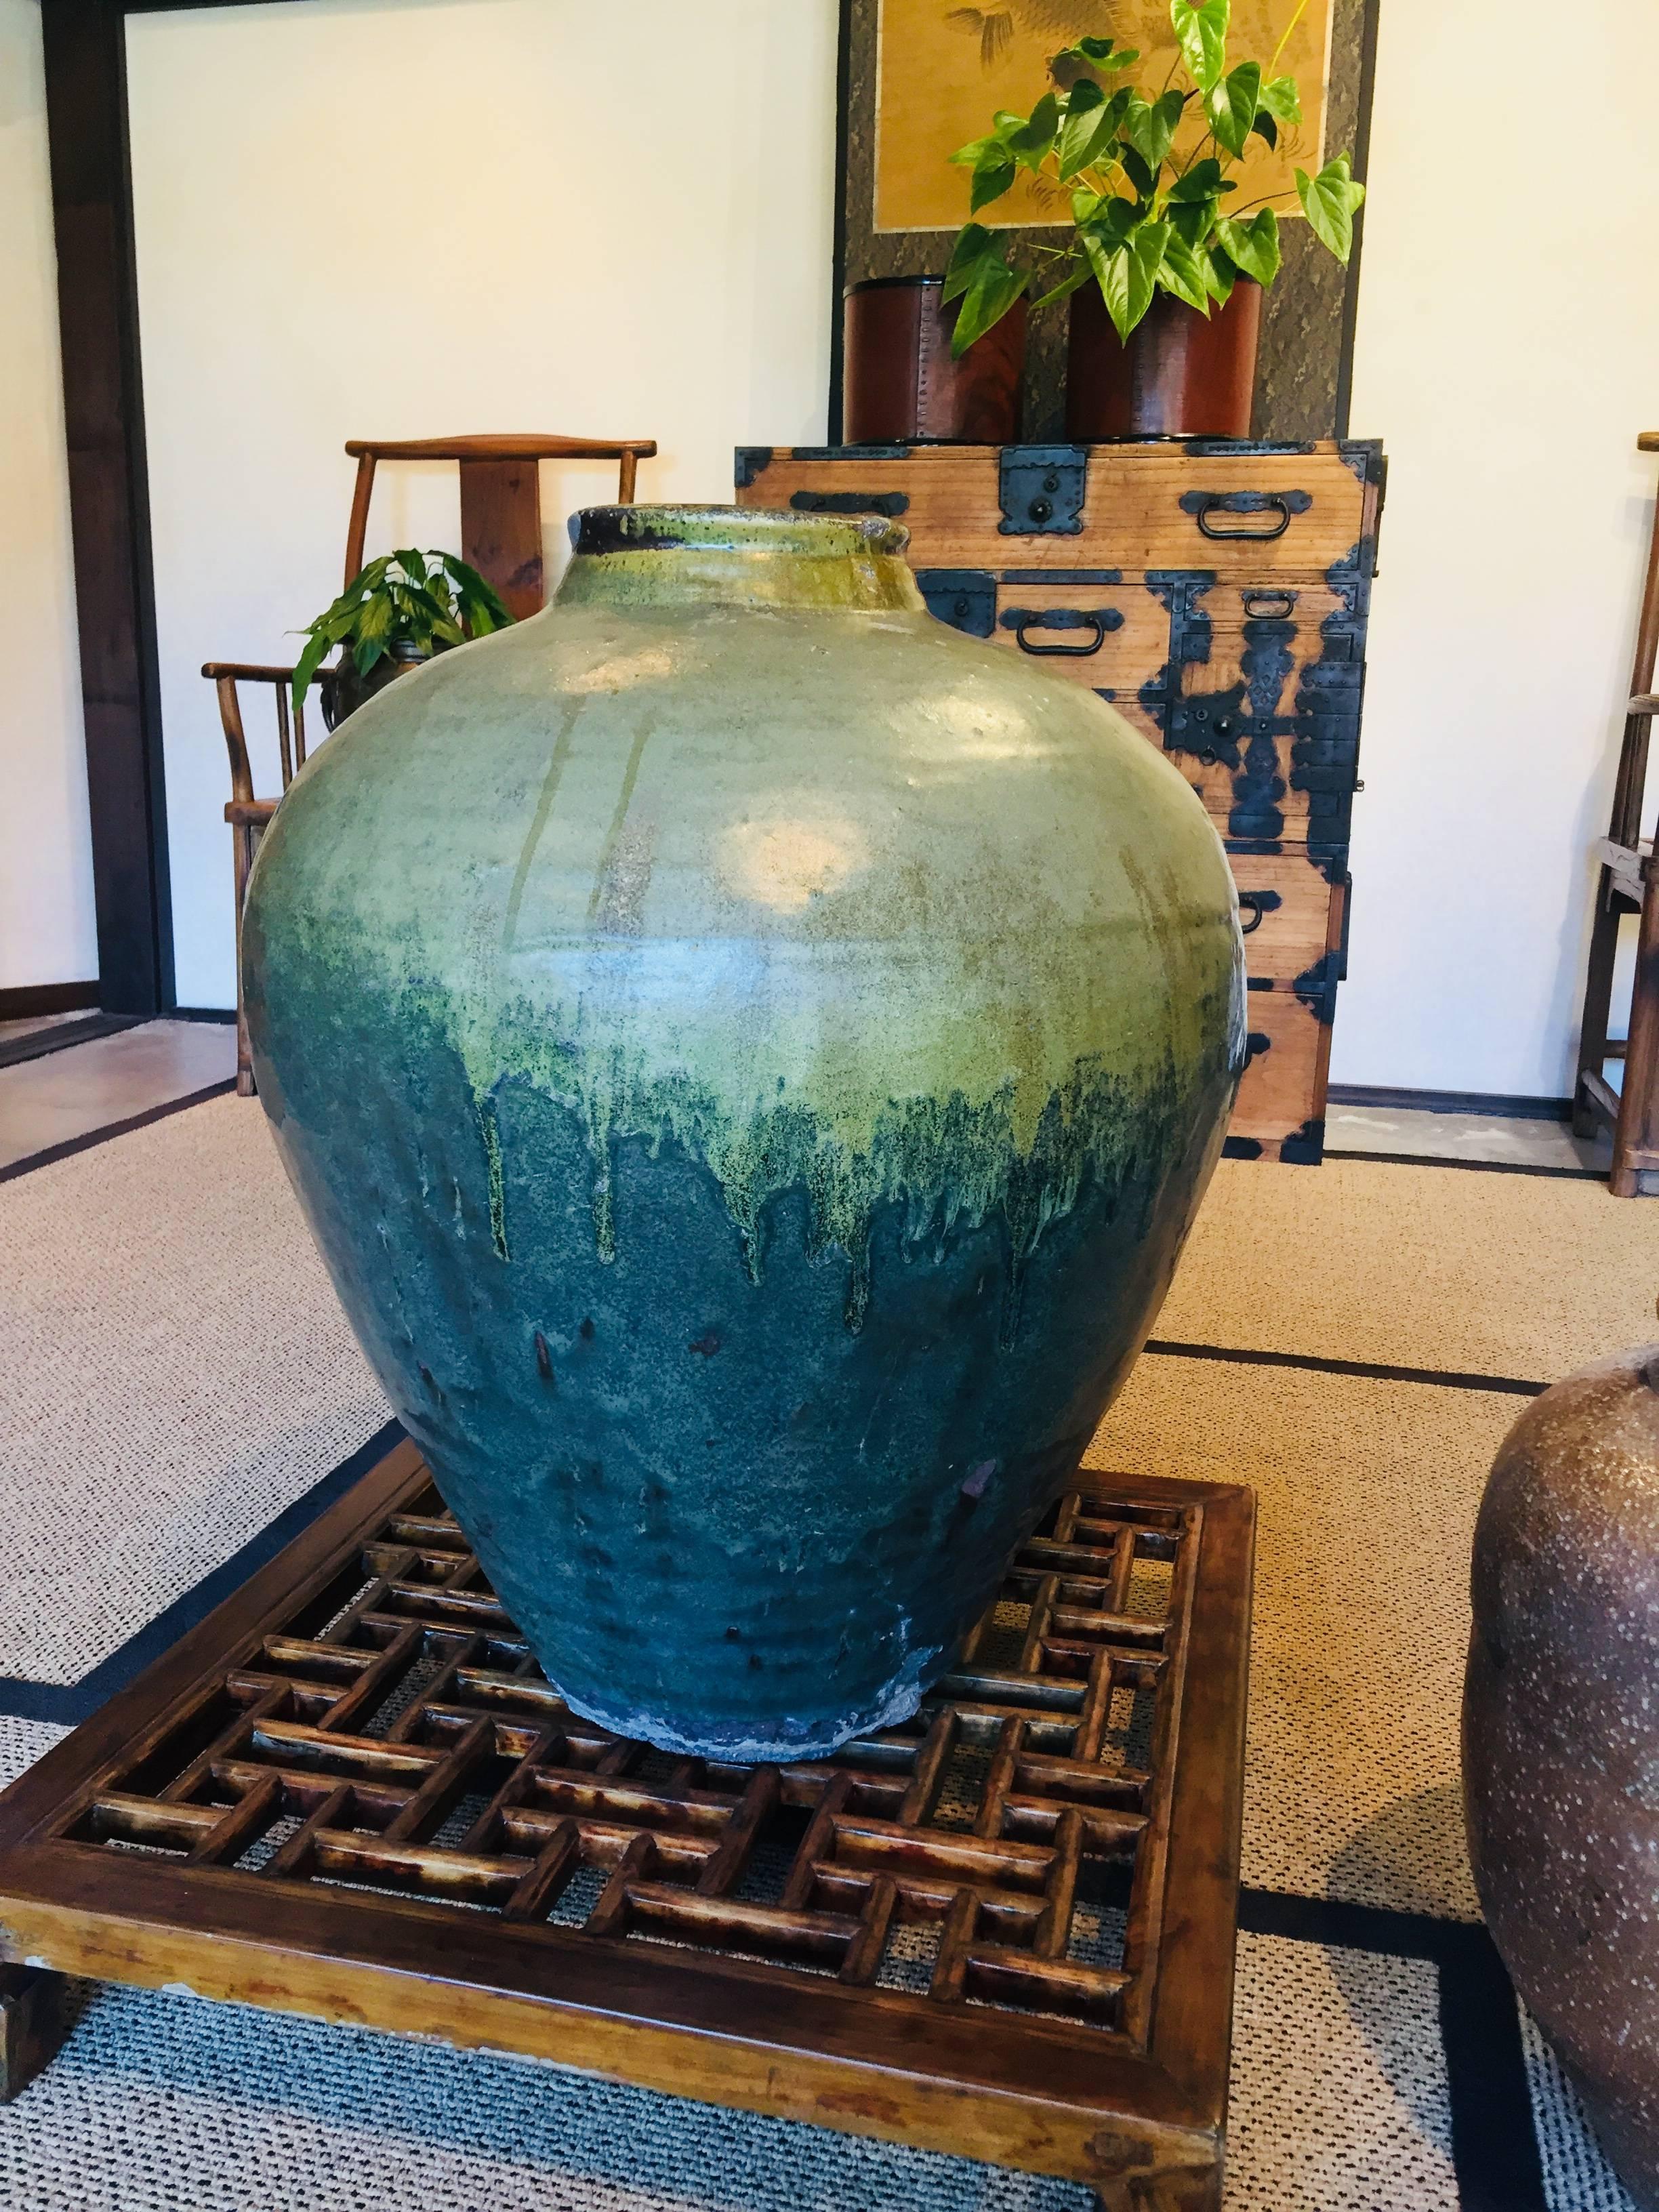 This large green glazed vase is from China, circa 1850.
This particular glaze is called tea dust glaze.\
 